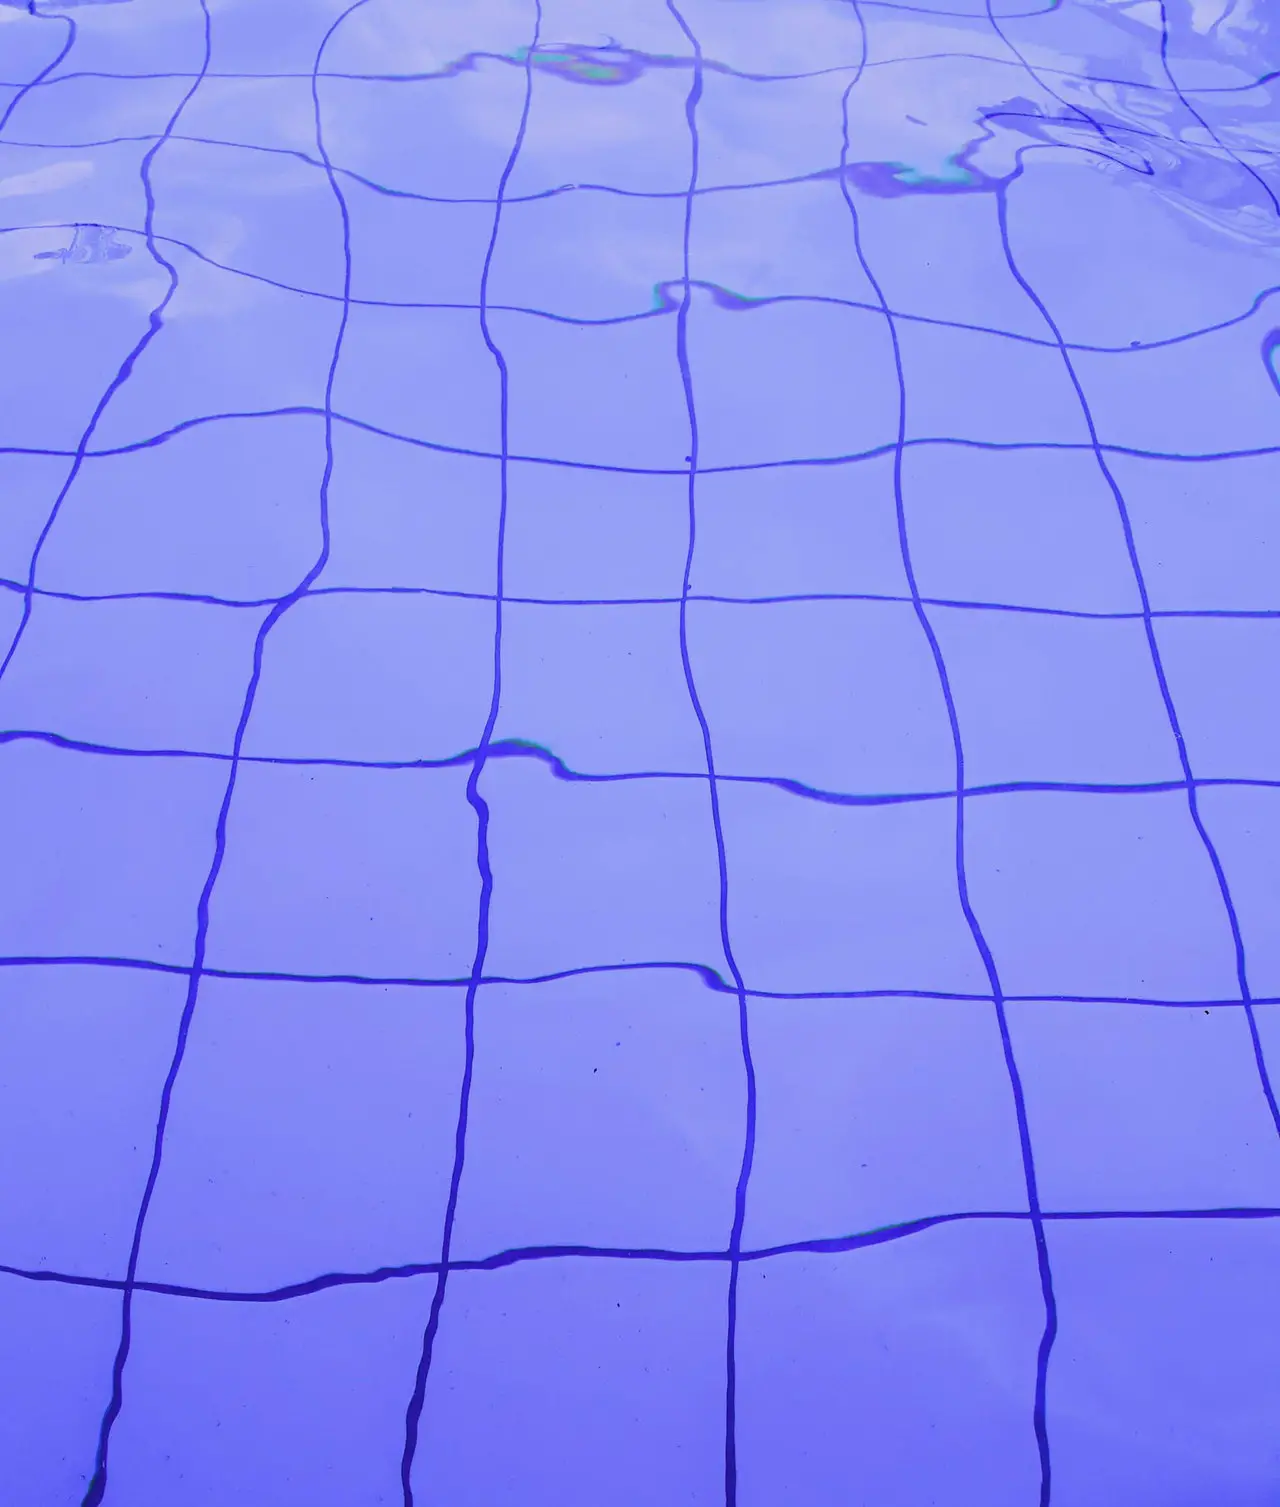 How Often Should You Drain your Pool?